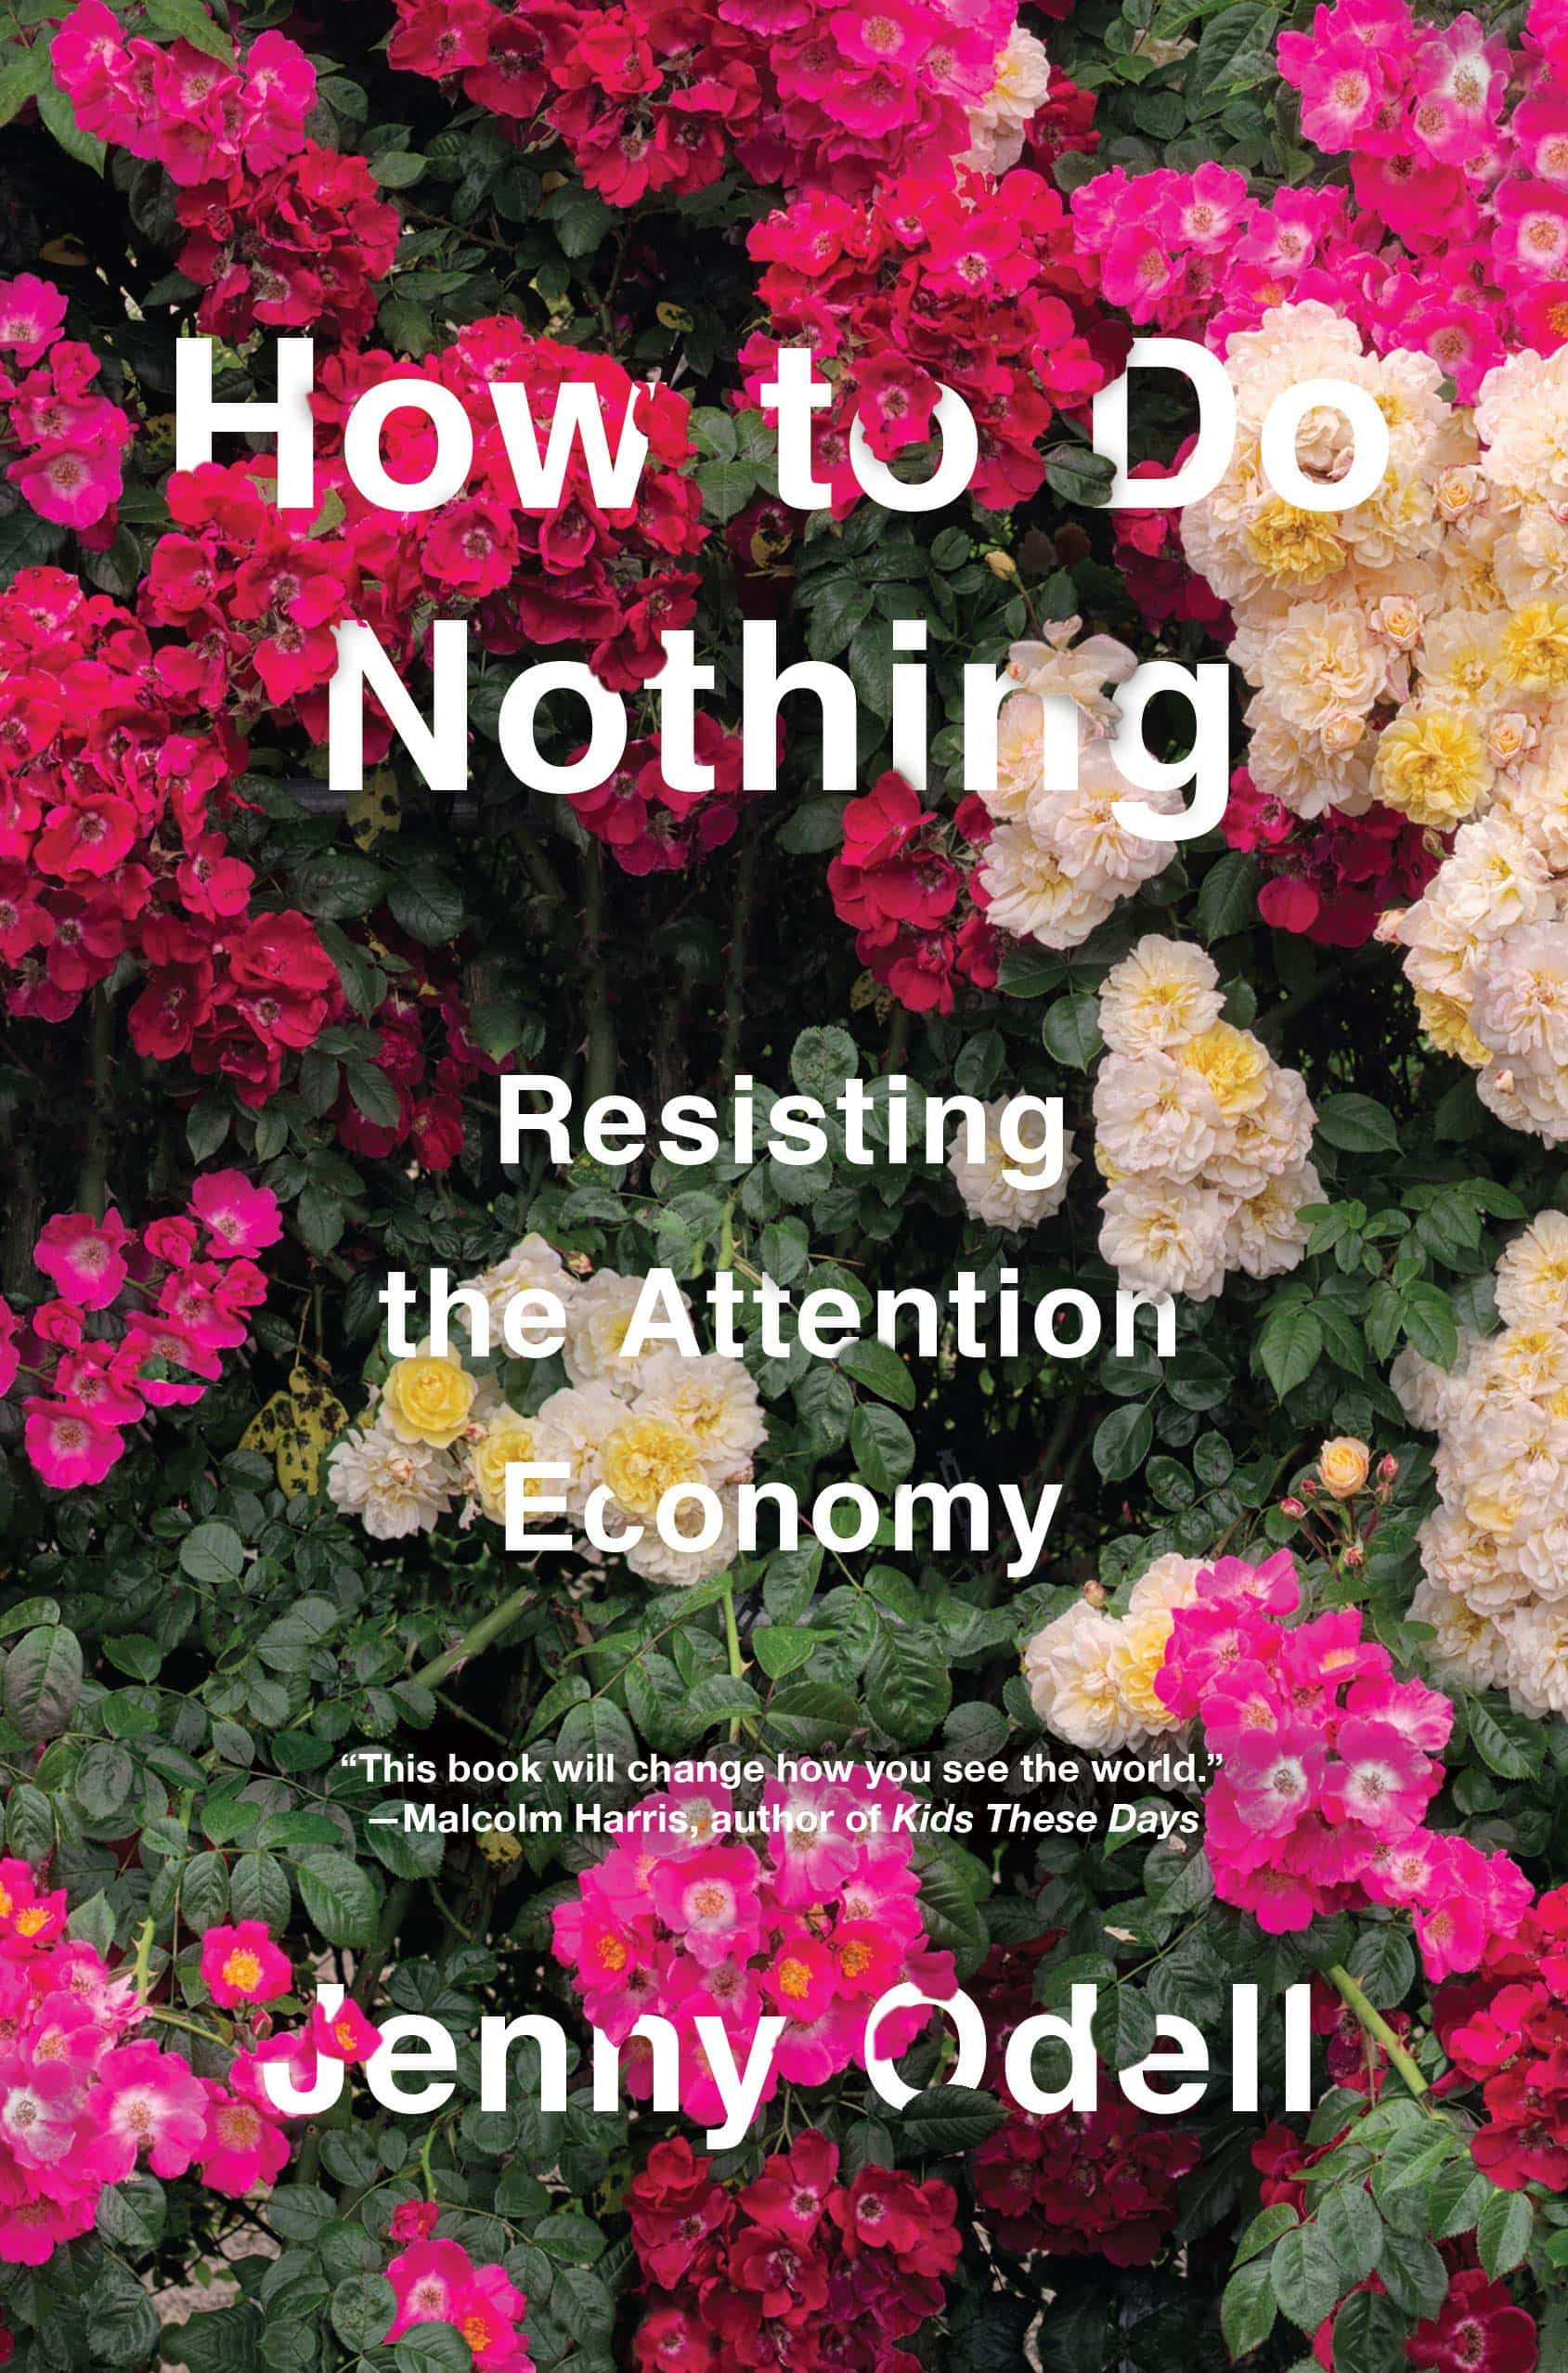 The cover of How to Do Nothing